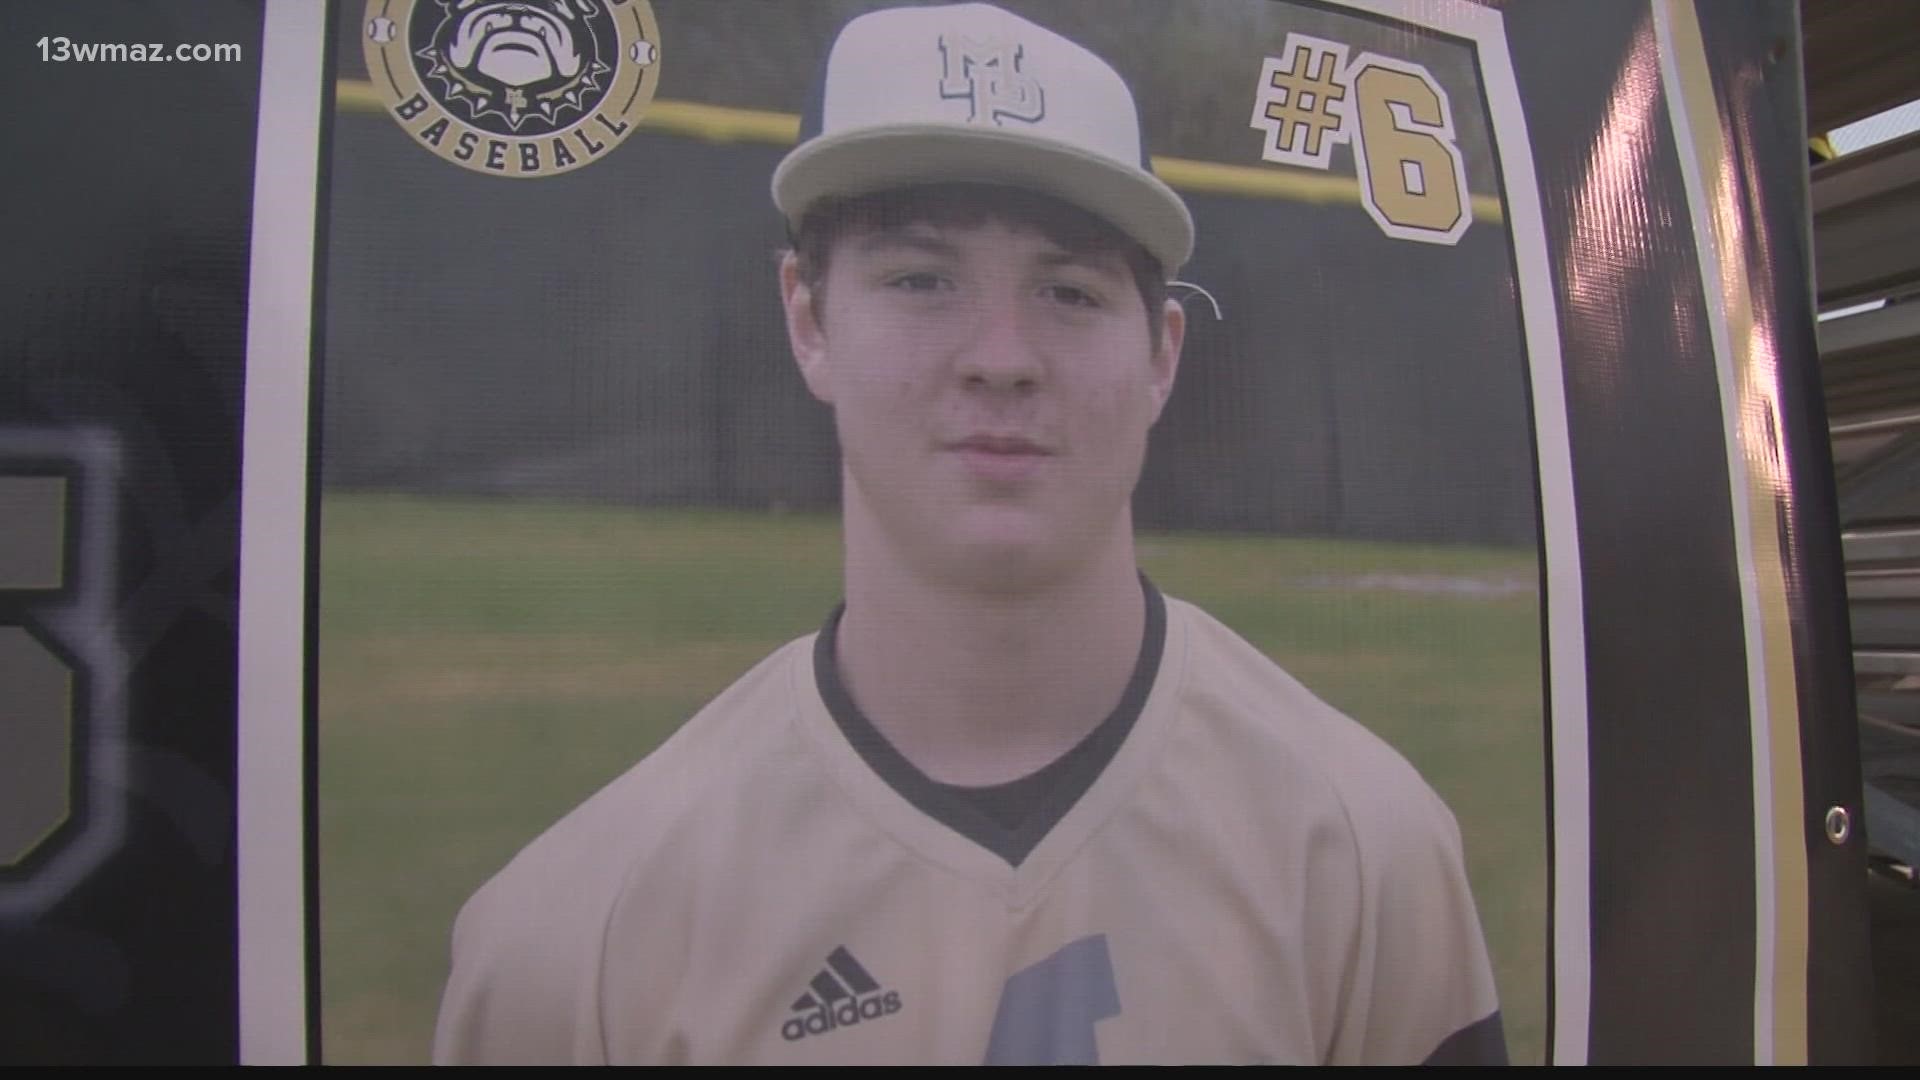 Mary Persons baseball player Caden Swancey died in a car accident in November, and the 17-year-old was a standout catcher for the Bulldogs.